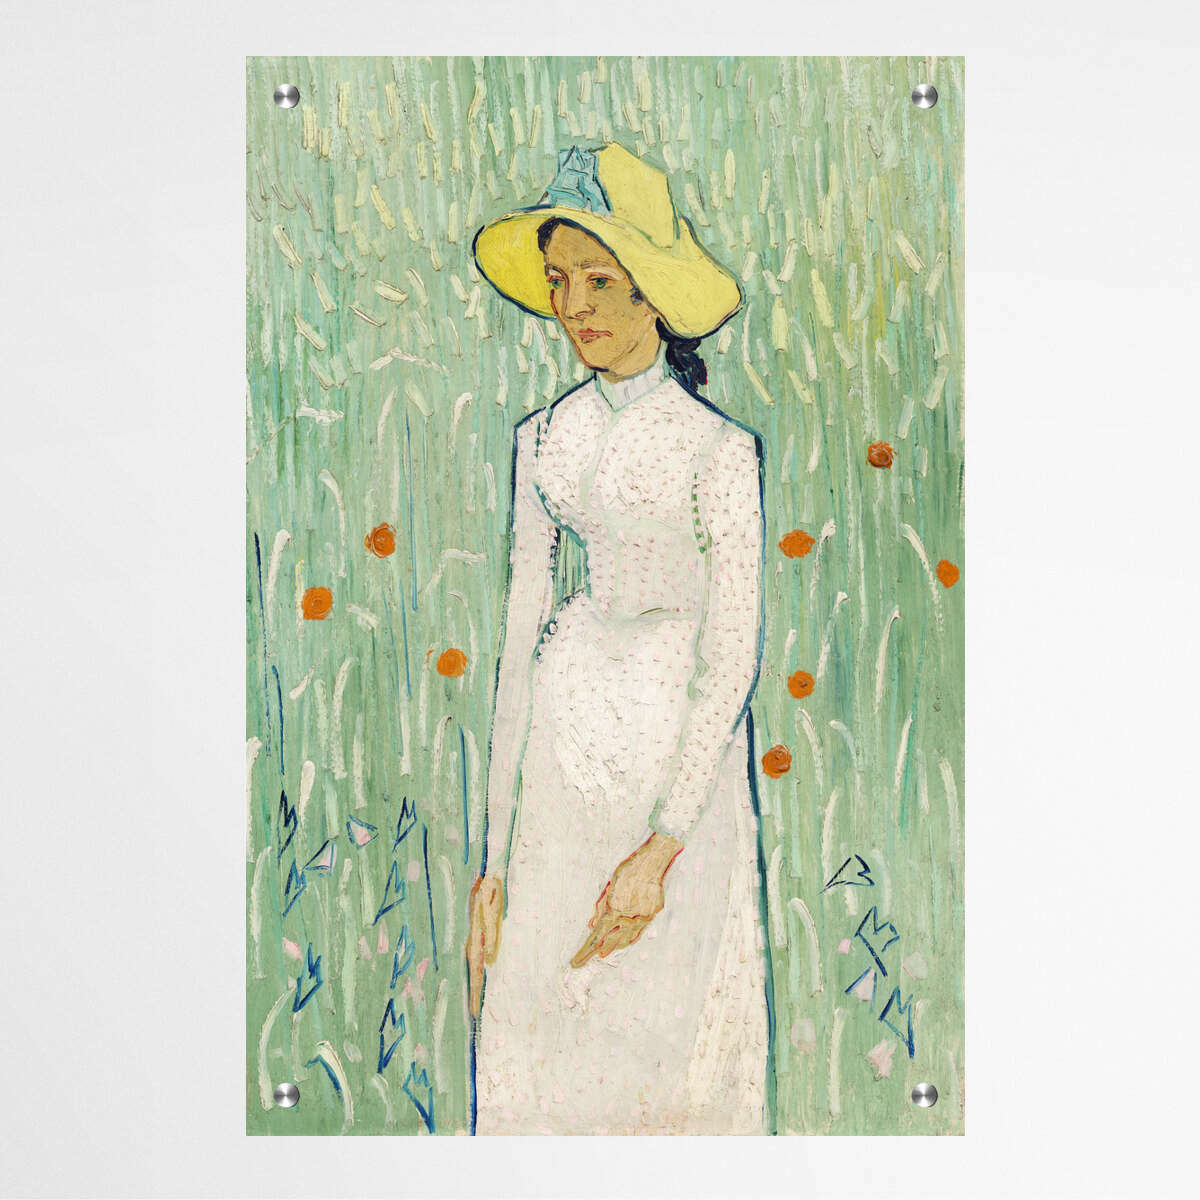 Girl in White by Vincent Van Gogh | Vincent Van Gogh Wall Art Prints - The Canvas Hive